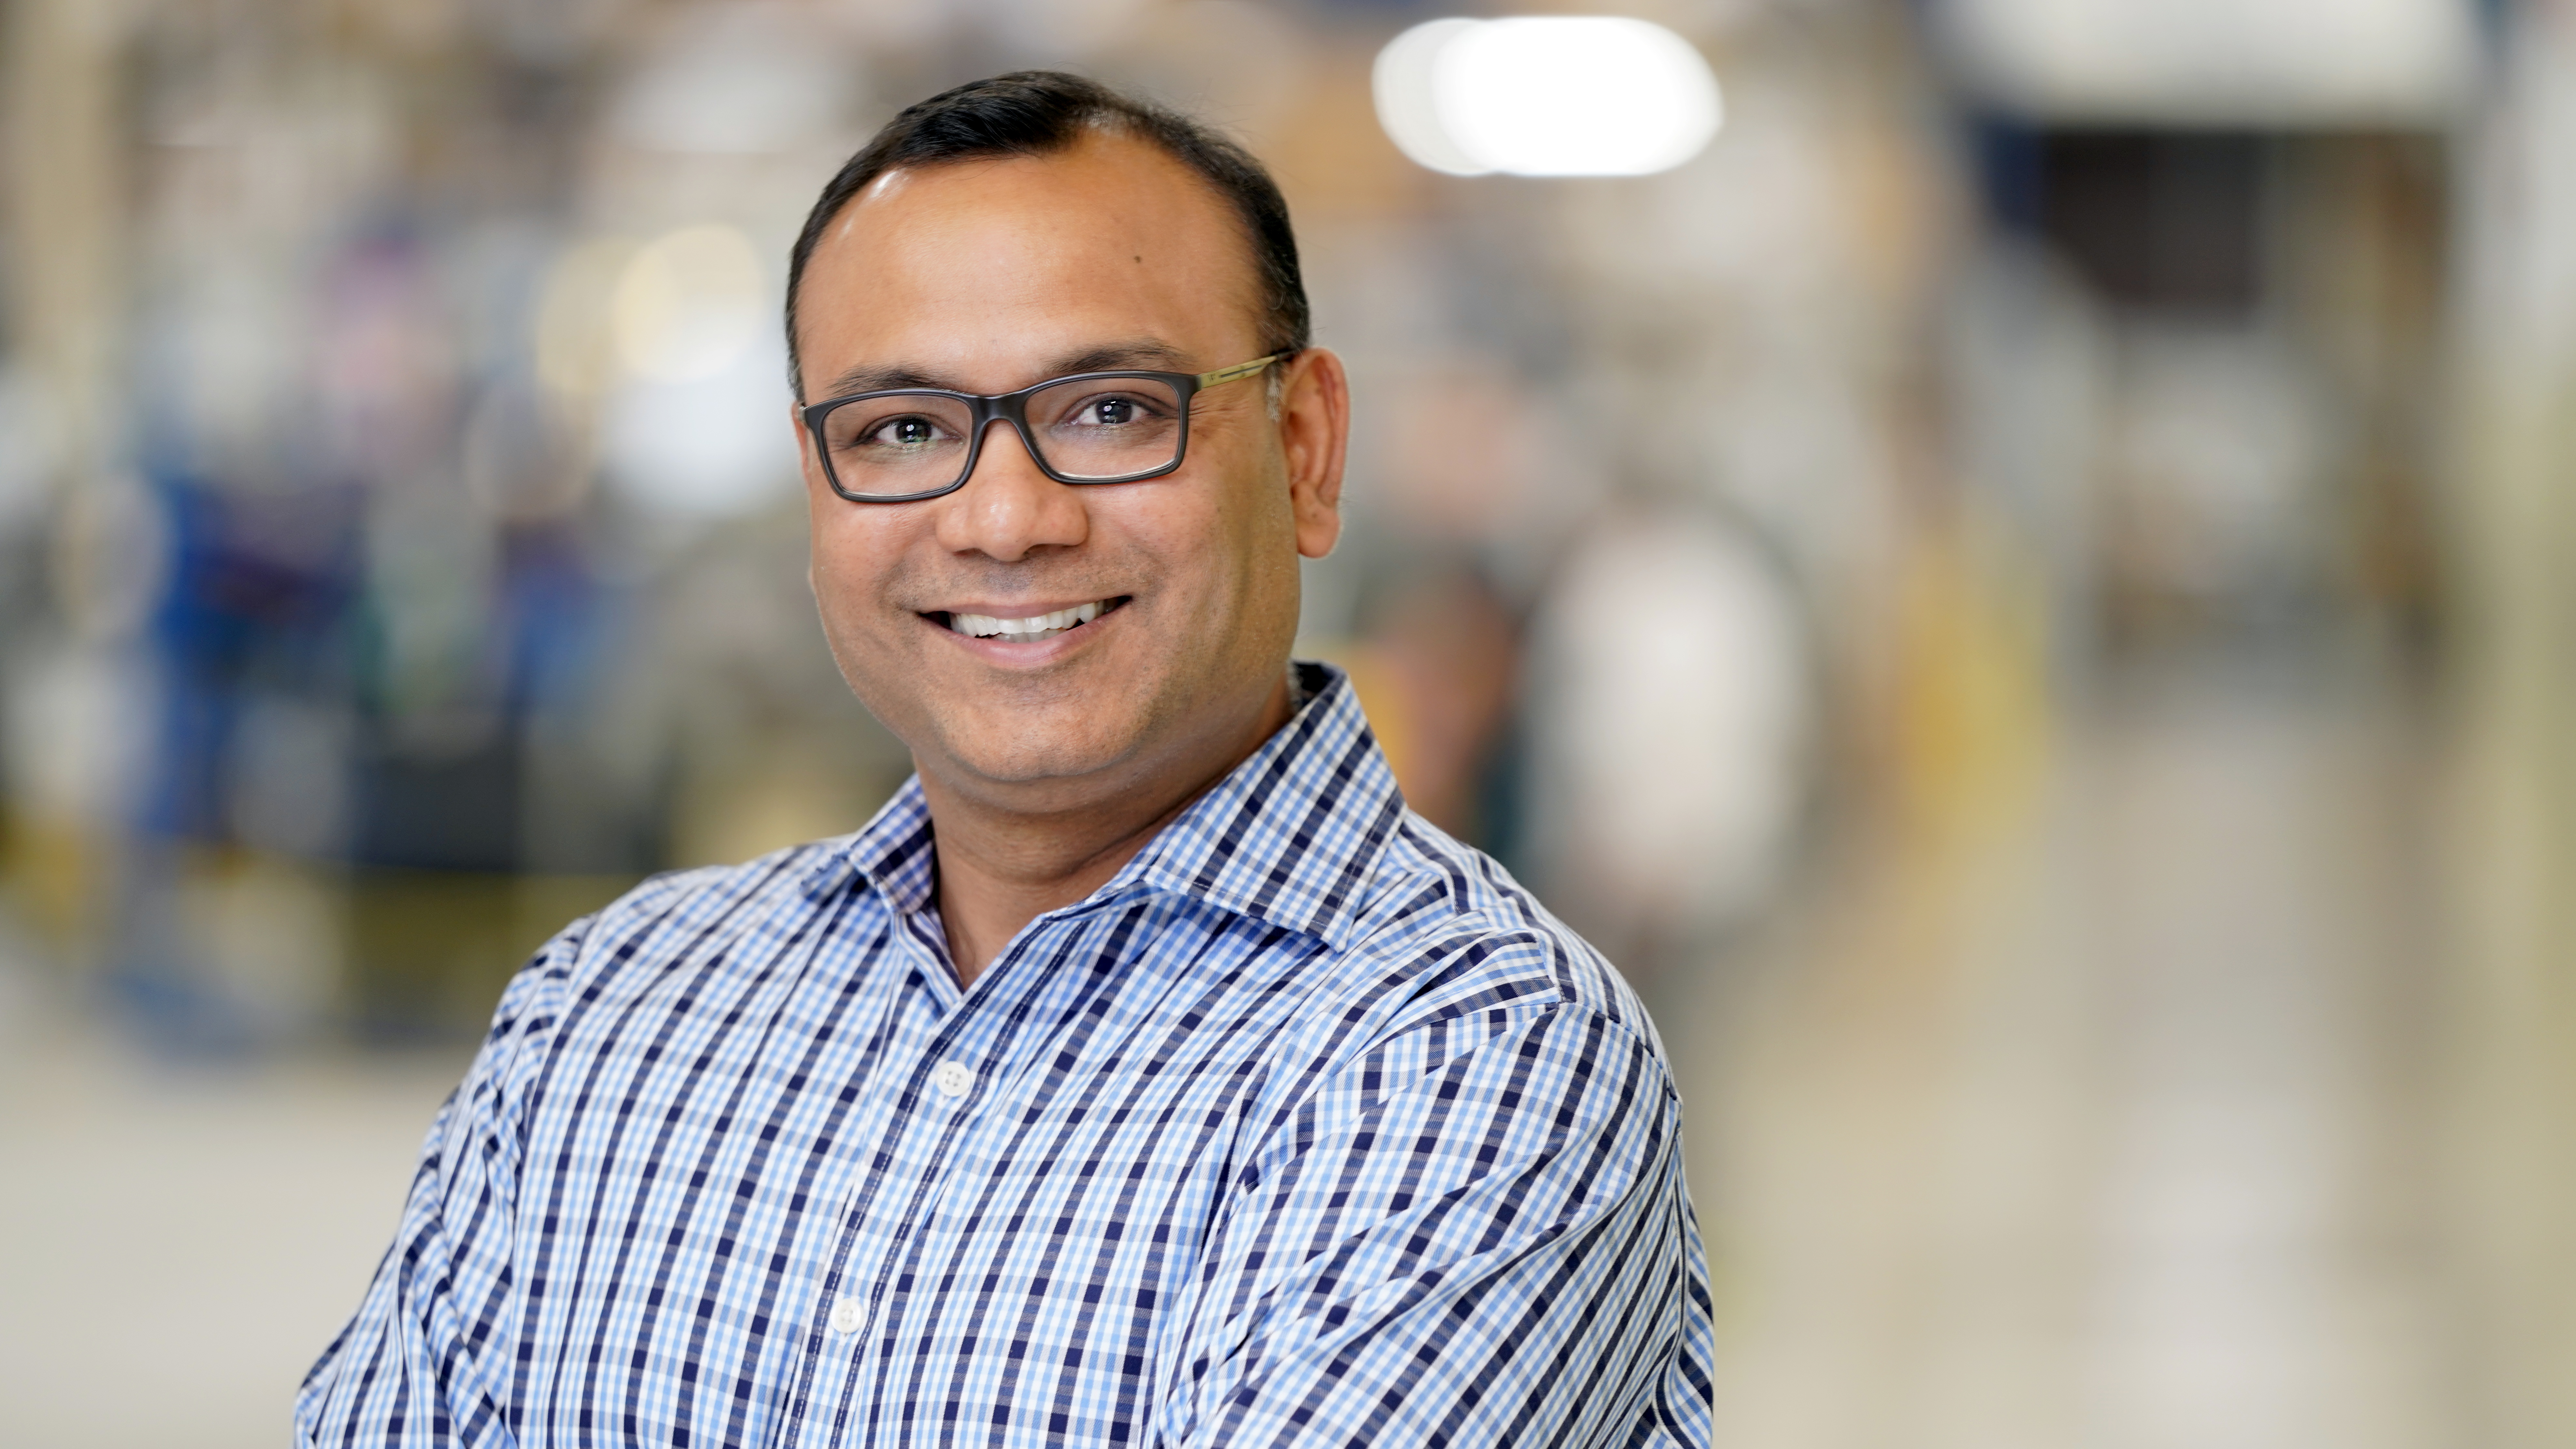 Vibhoosh Gupta, Director of Product Management, Emerson Automation Solutions